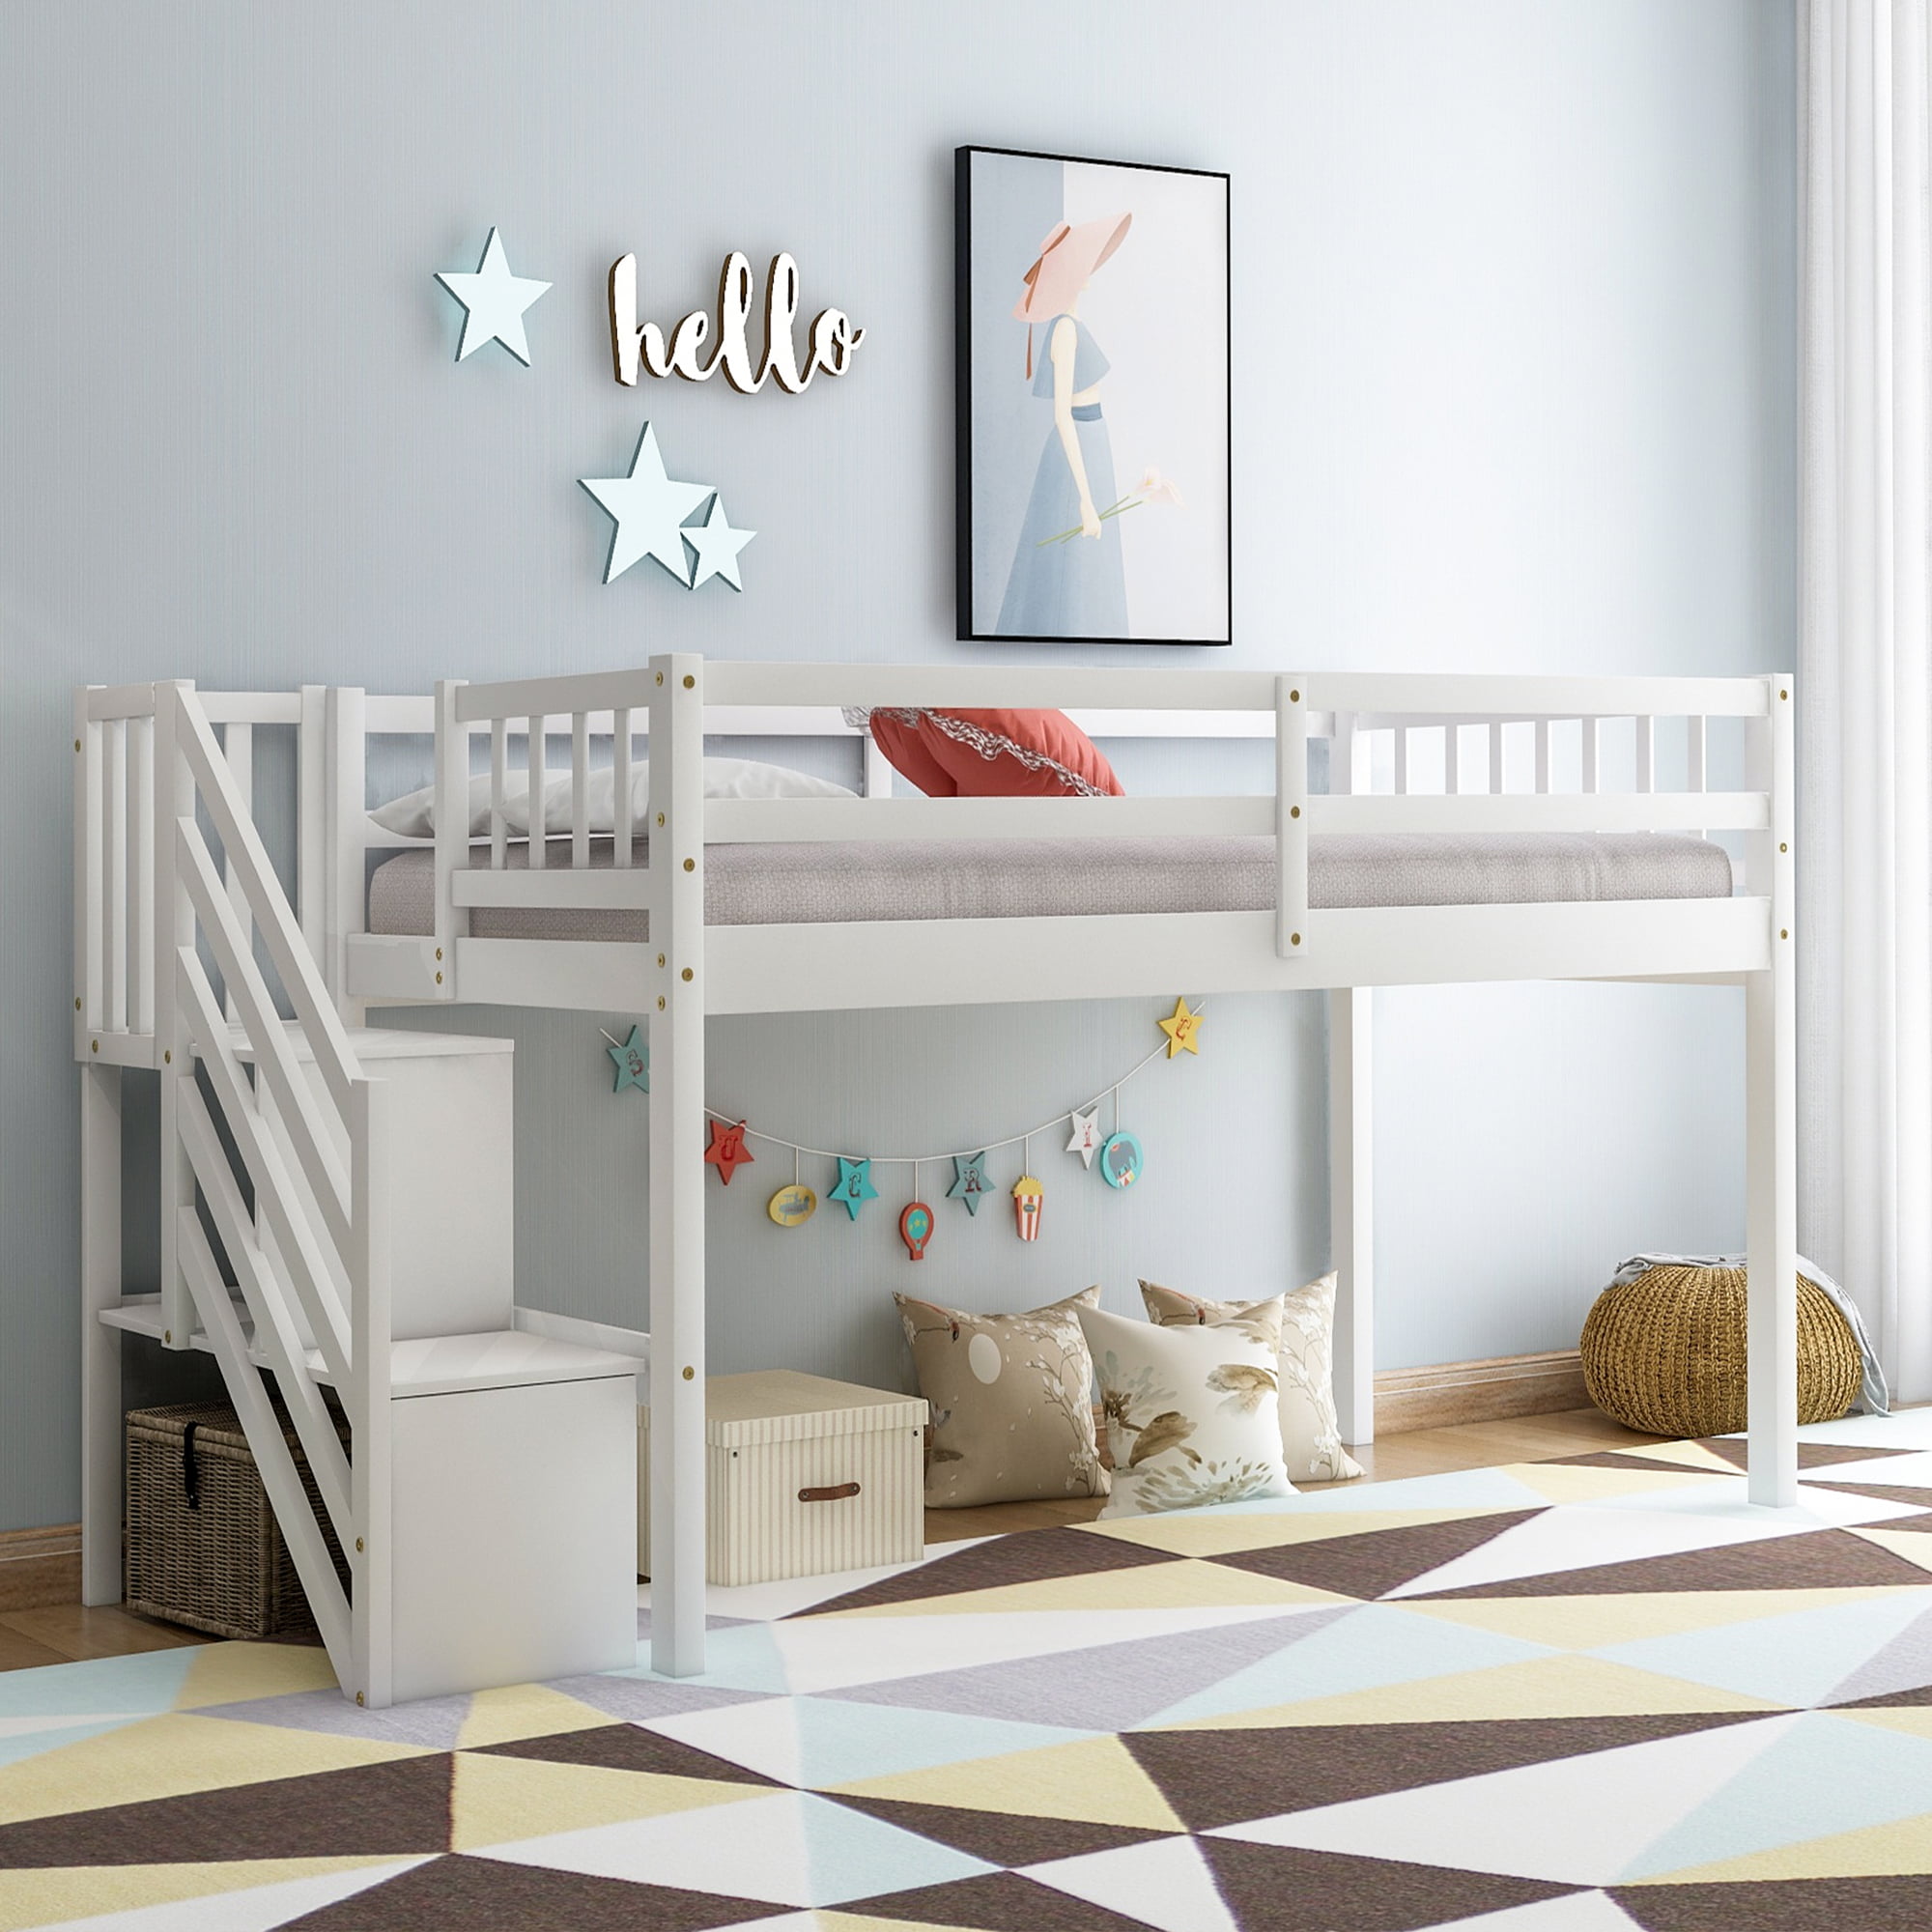 Euroco Wood Twin Loft Bed With Stairs, White Twin Bunk Beds With Stairs